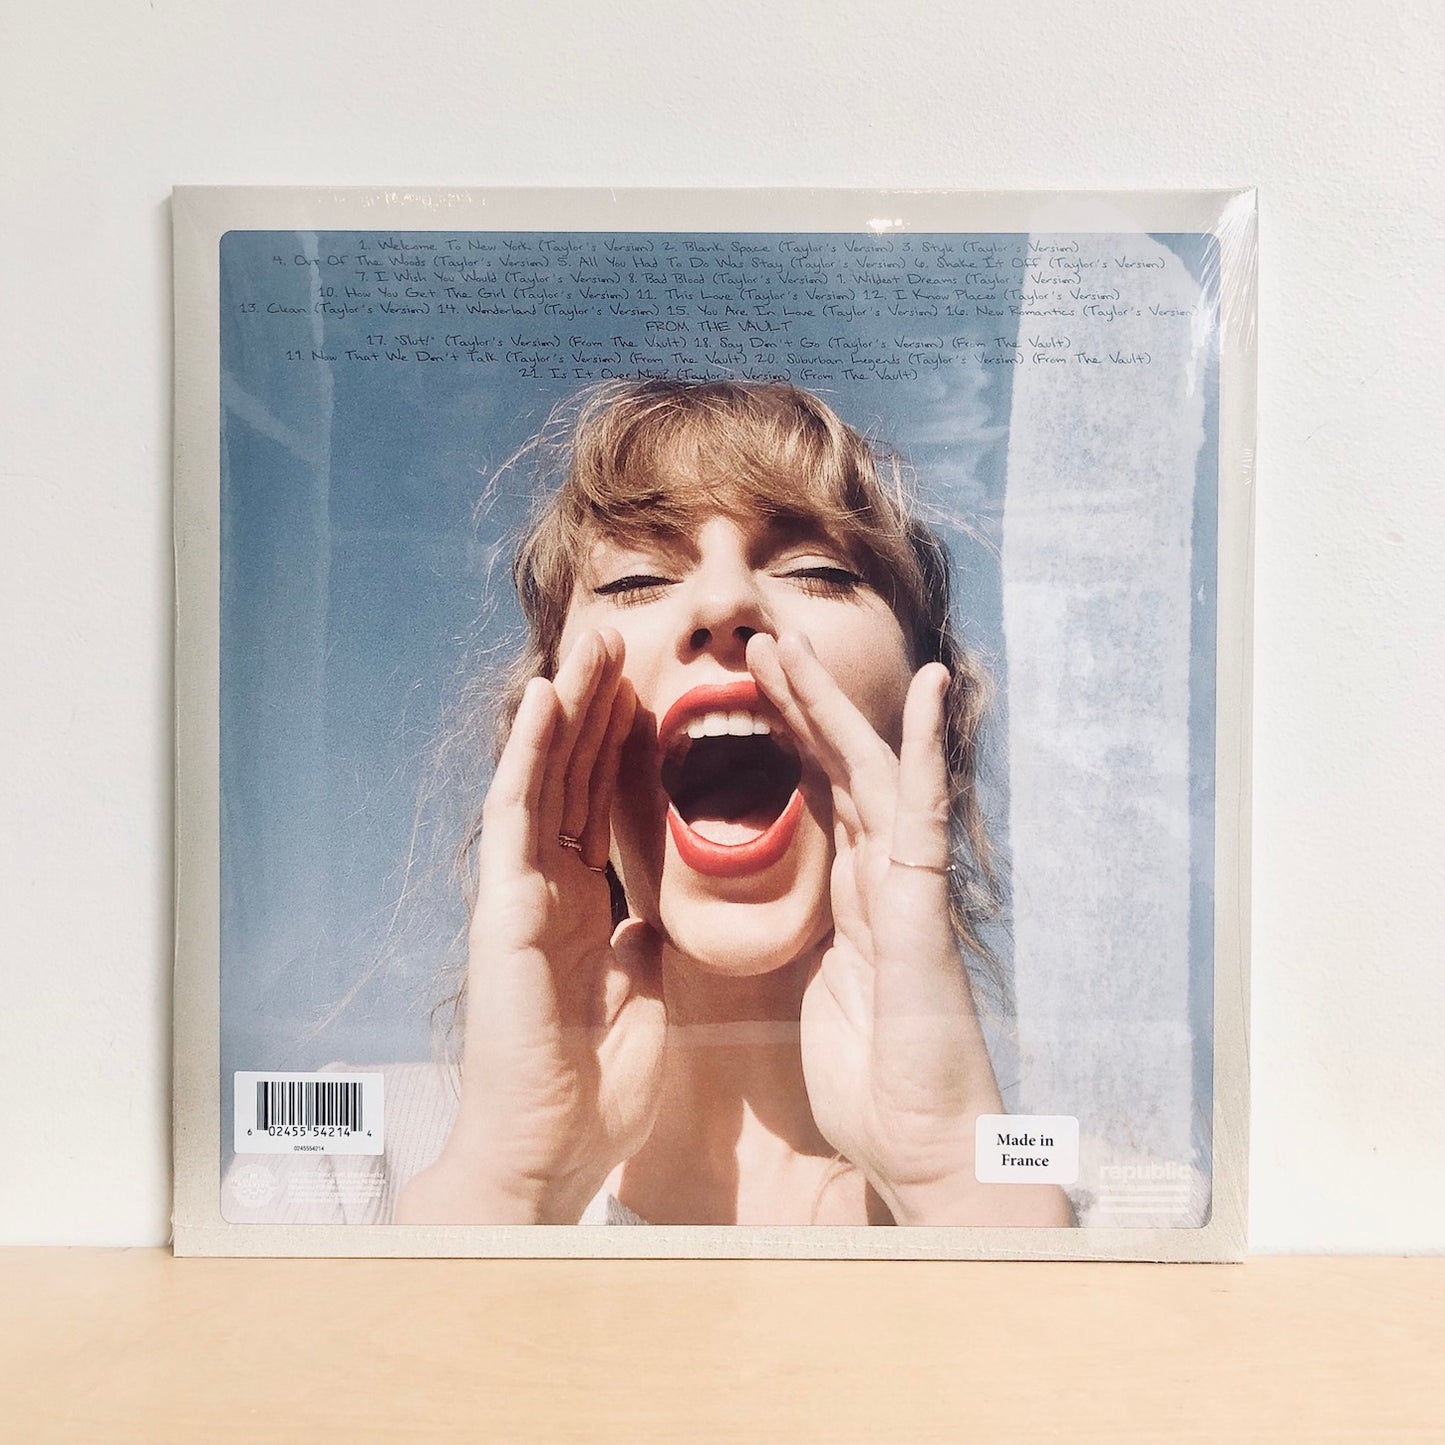 Taylor Swift - 1989 [Taylor's Version]. 2LP [Crystal Skies Blue Edition]